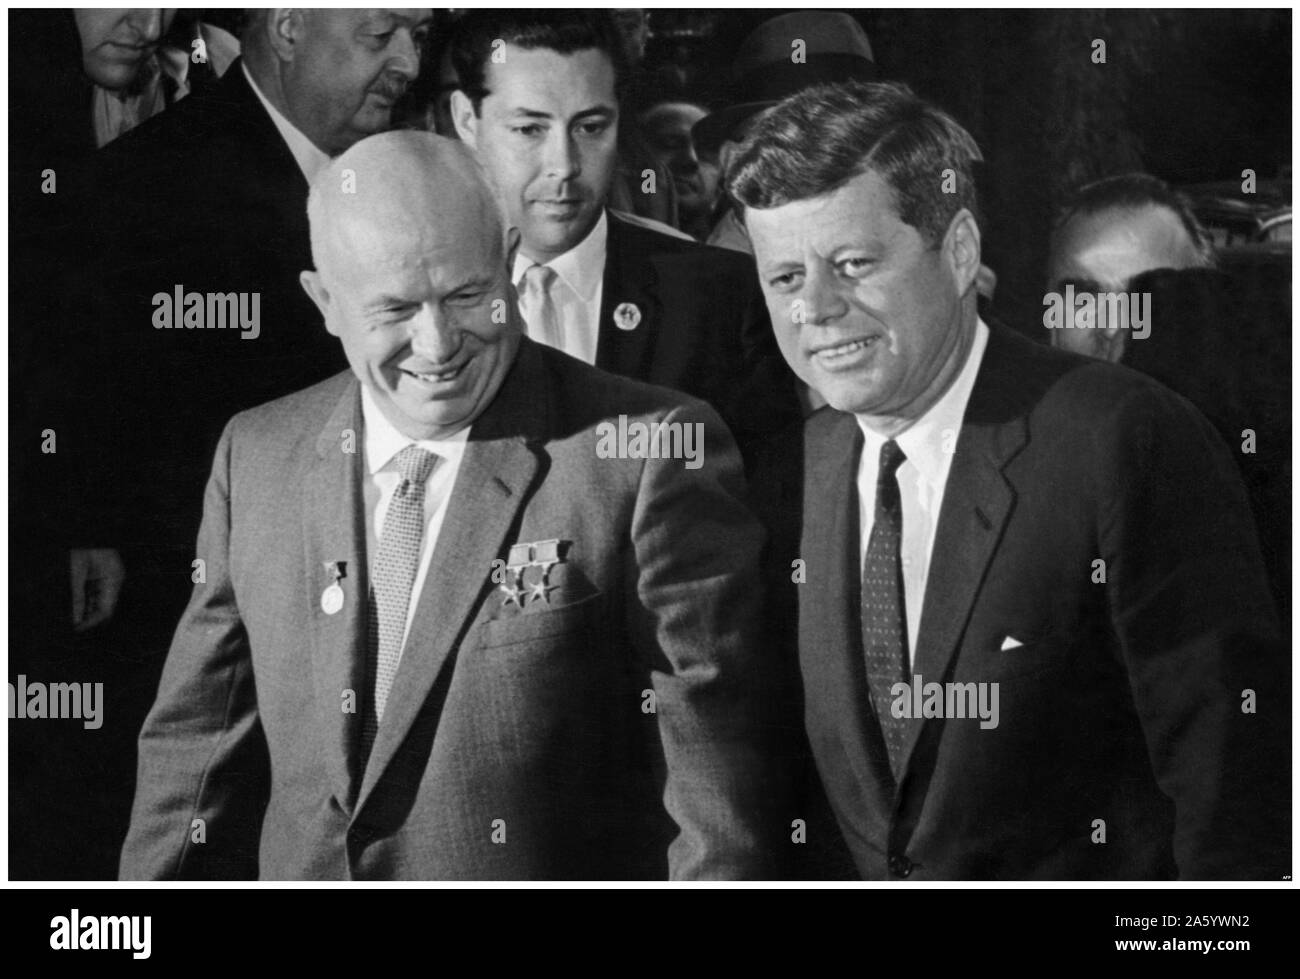 The Vienna summit was a summit meeting held on June 4, 1961, in Vienna, Austria, between President John F. Kennedy of the United States and Premier Nikita Khrushchev of the Soviet Union. The leaders of the two superpowers of the Cold War era discussed numerous issues in the relationship between their countries. Stock Photo